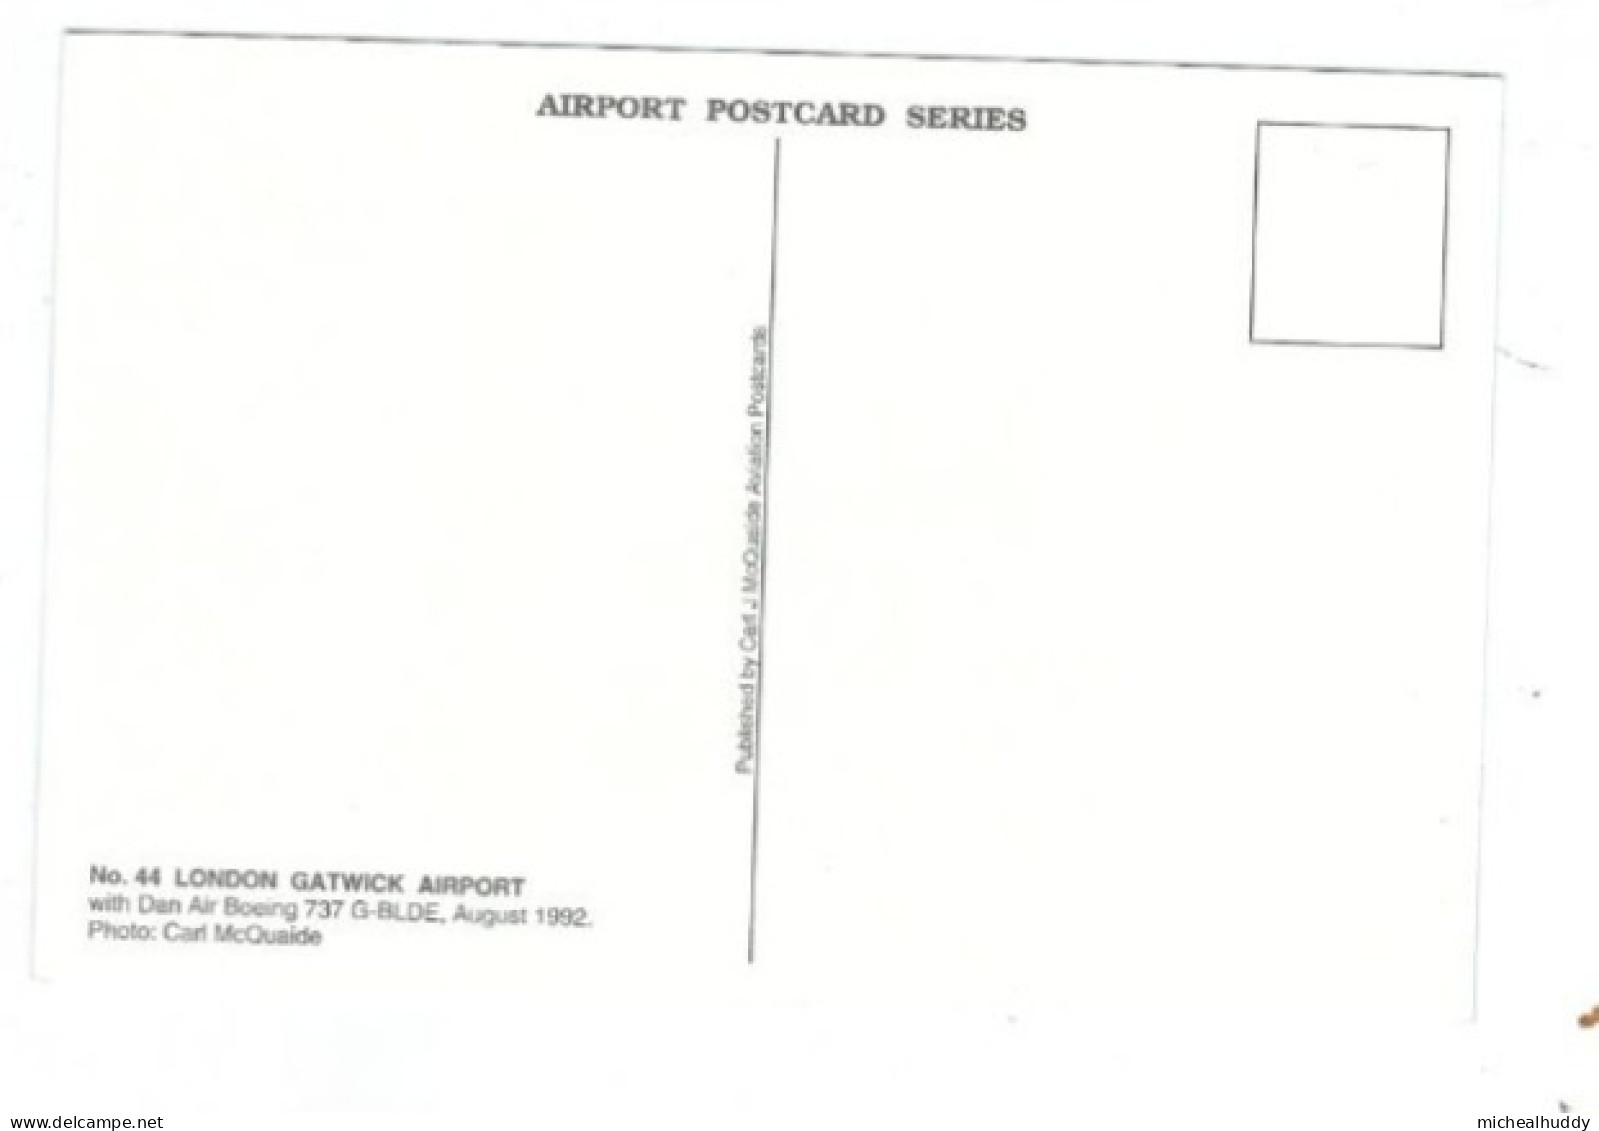 POSTCARD   PUBL BY  BY C MCQUAIDE IN HIS AIRPORT SERIES  LONDON GATWICK   CARD N0  44 - Aerodromes